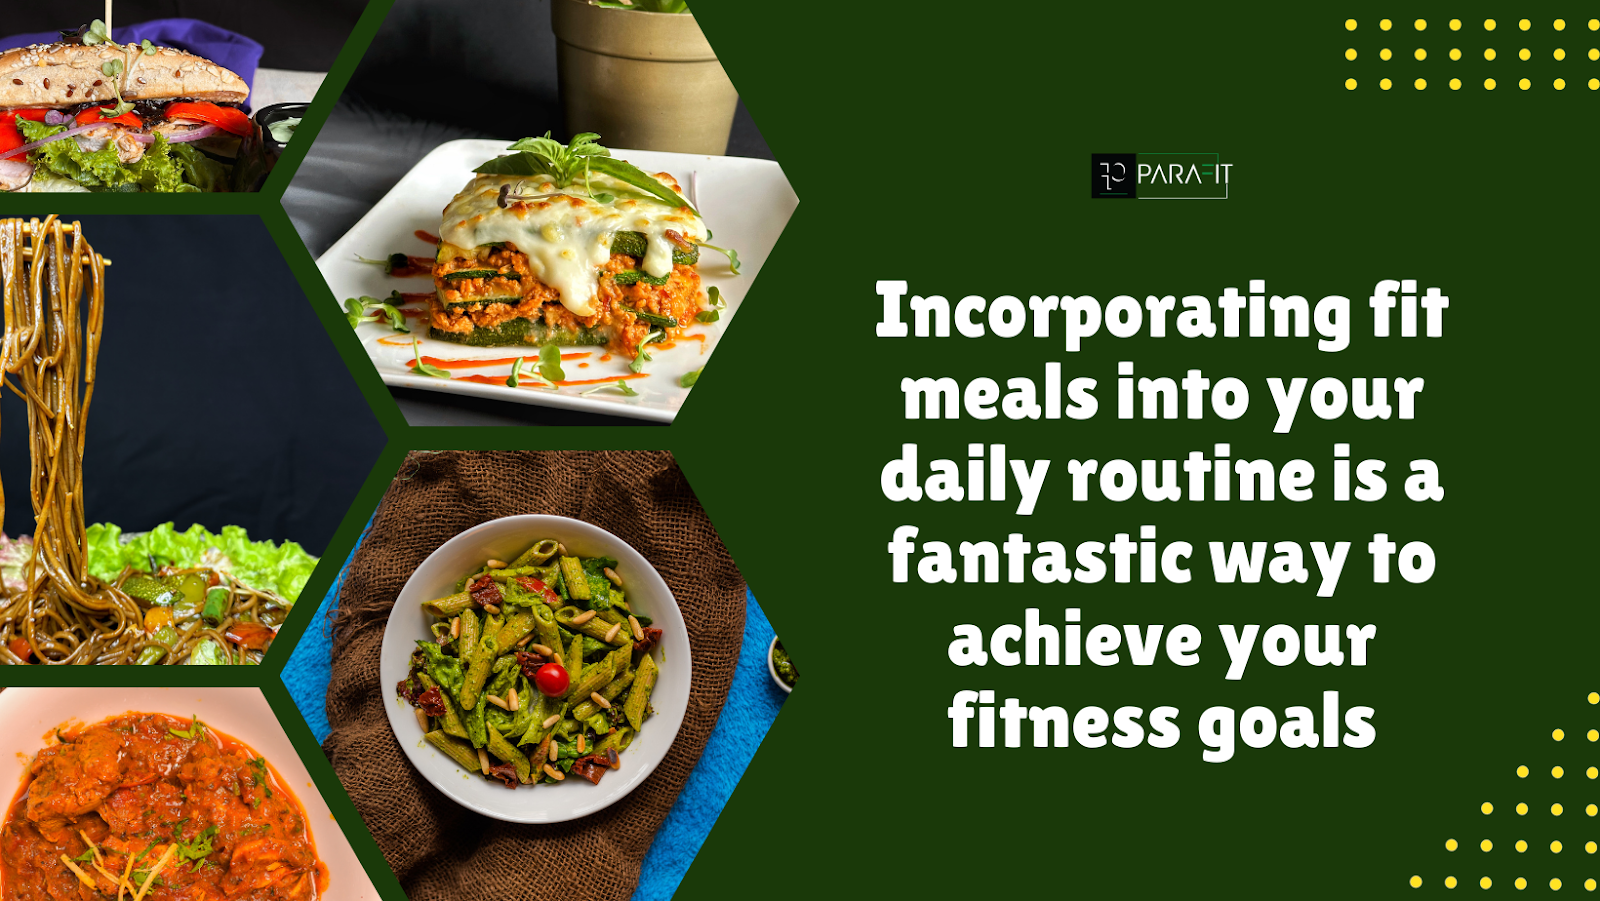 Achieve Your Fitness Goals with these Nutritious Fit Meals